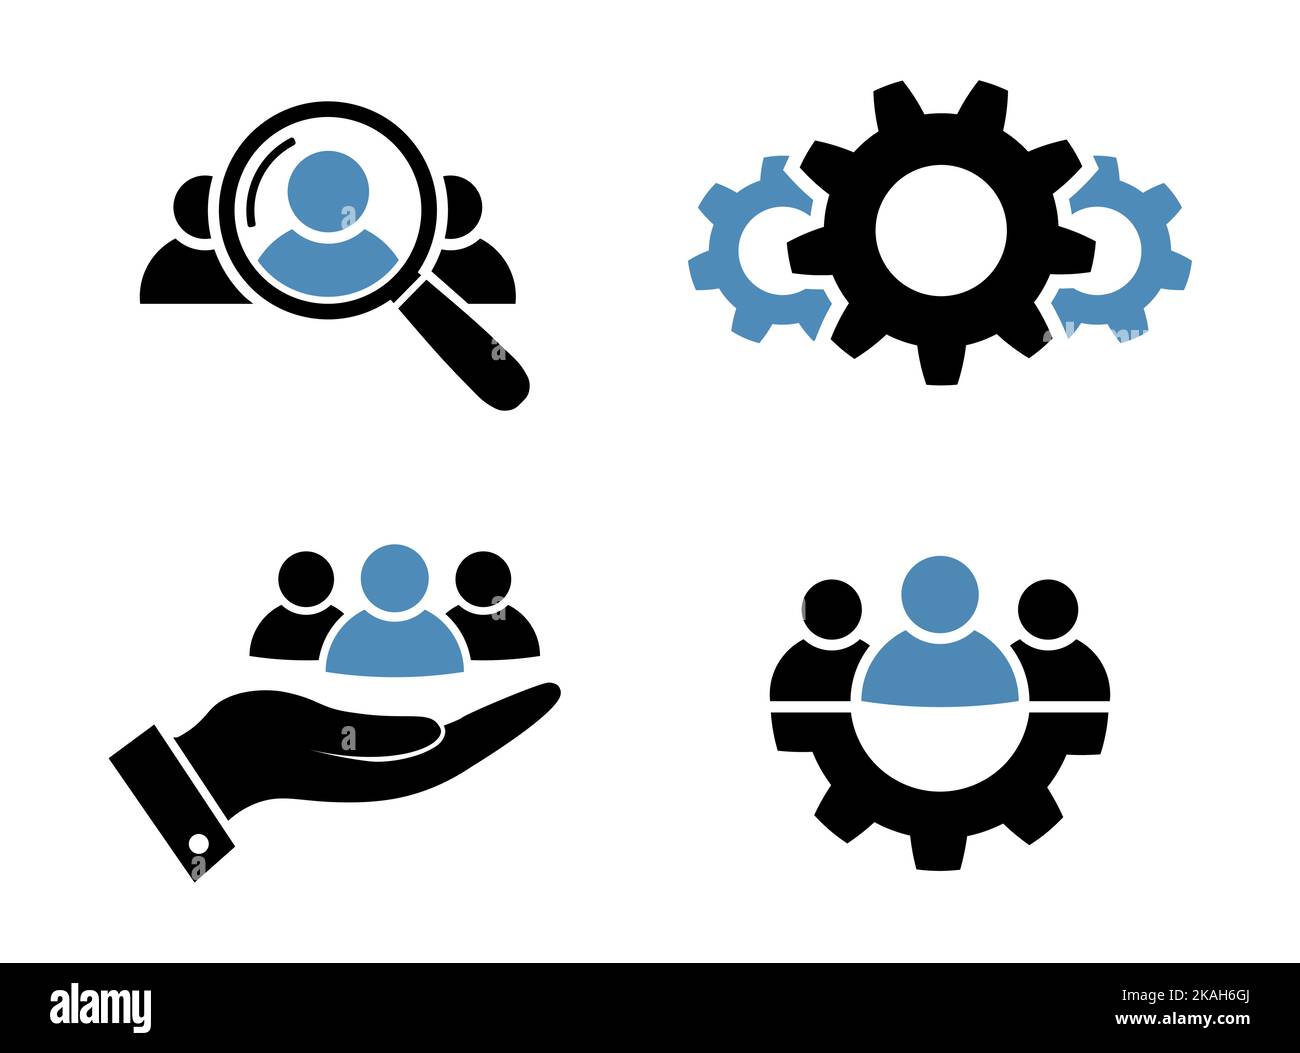 Research, customer retention, process and teamwork icon set in flat style Search man, progress, customer care and leadership symbols Black and blue bu Stock Vector